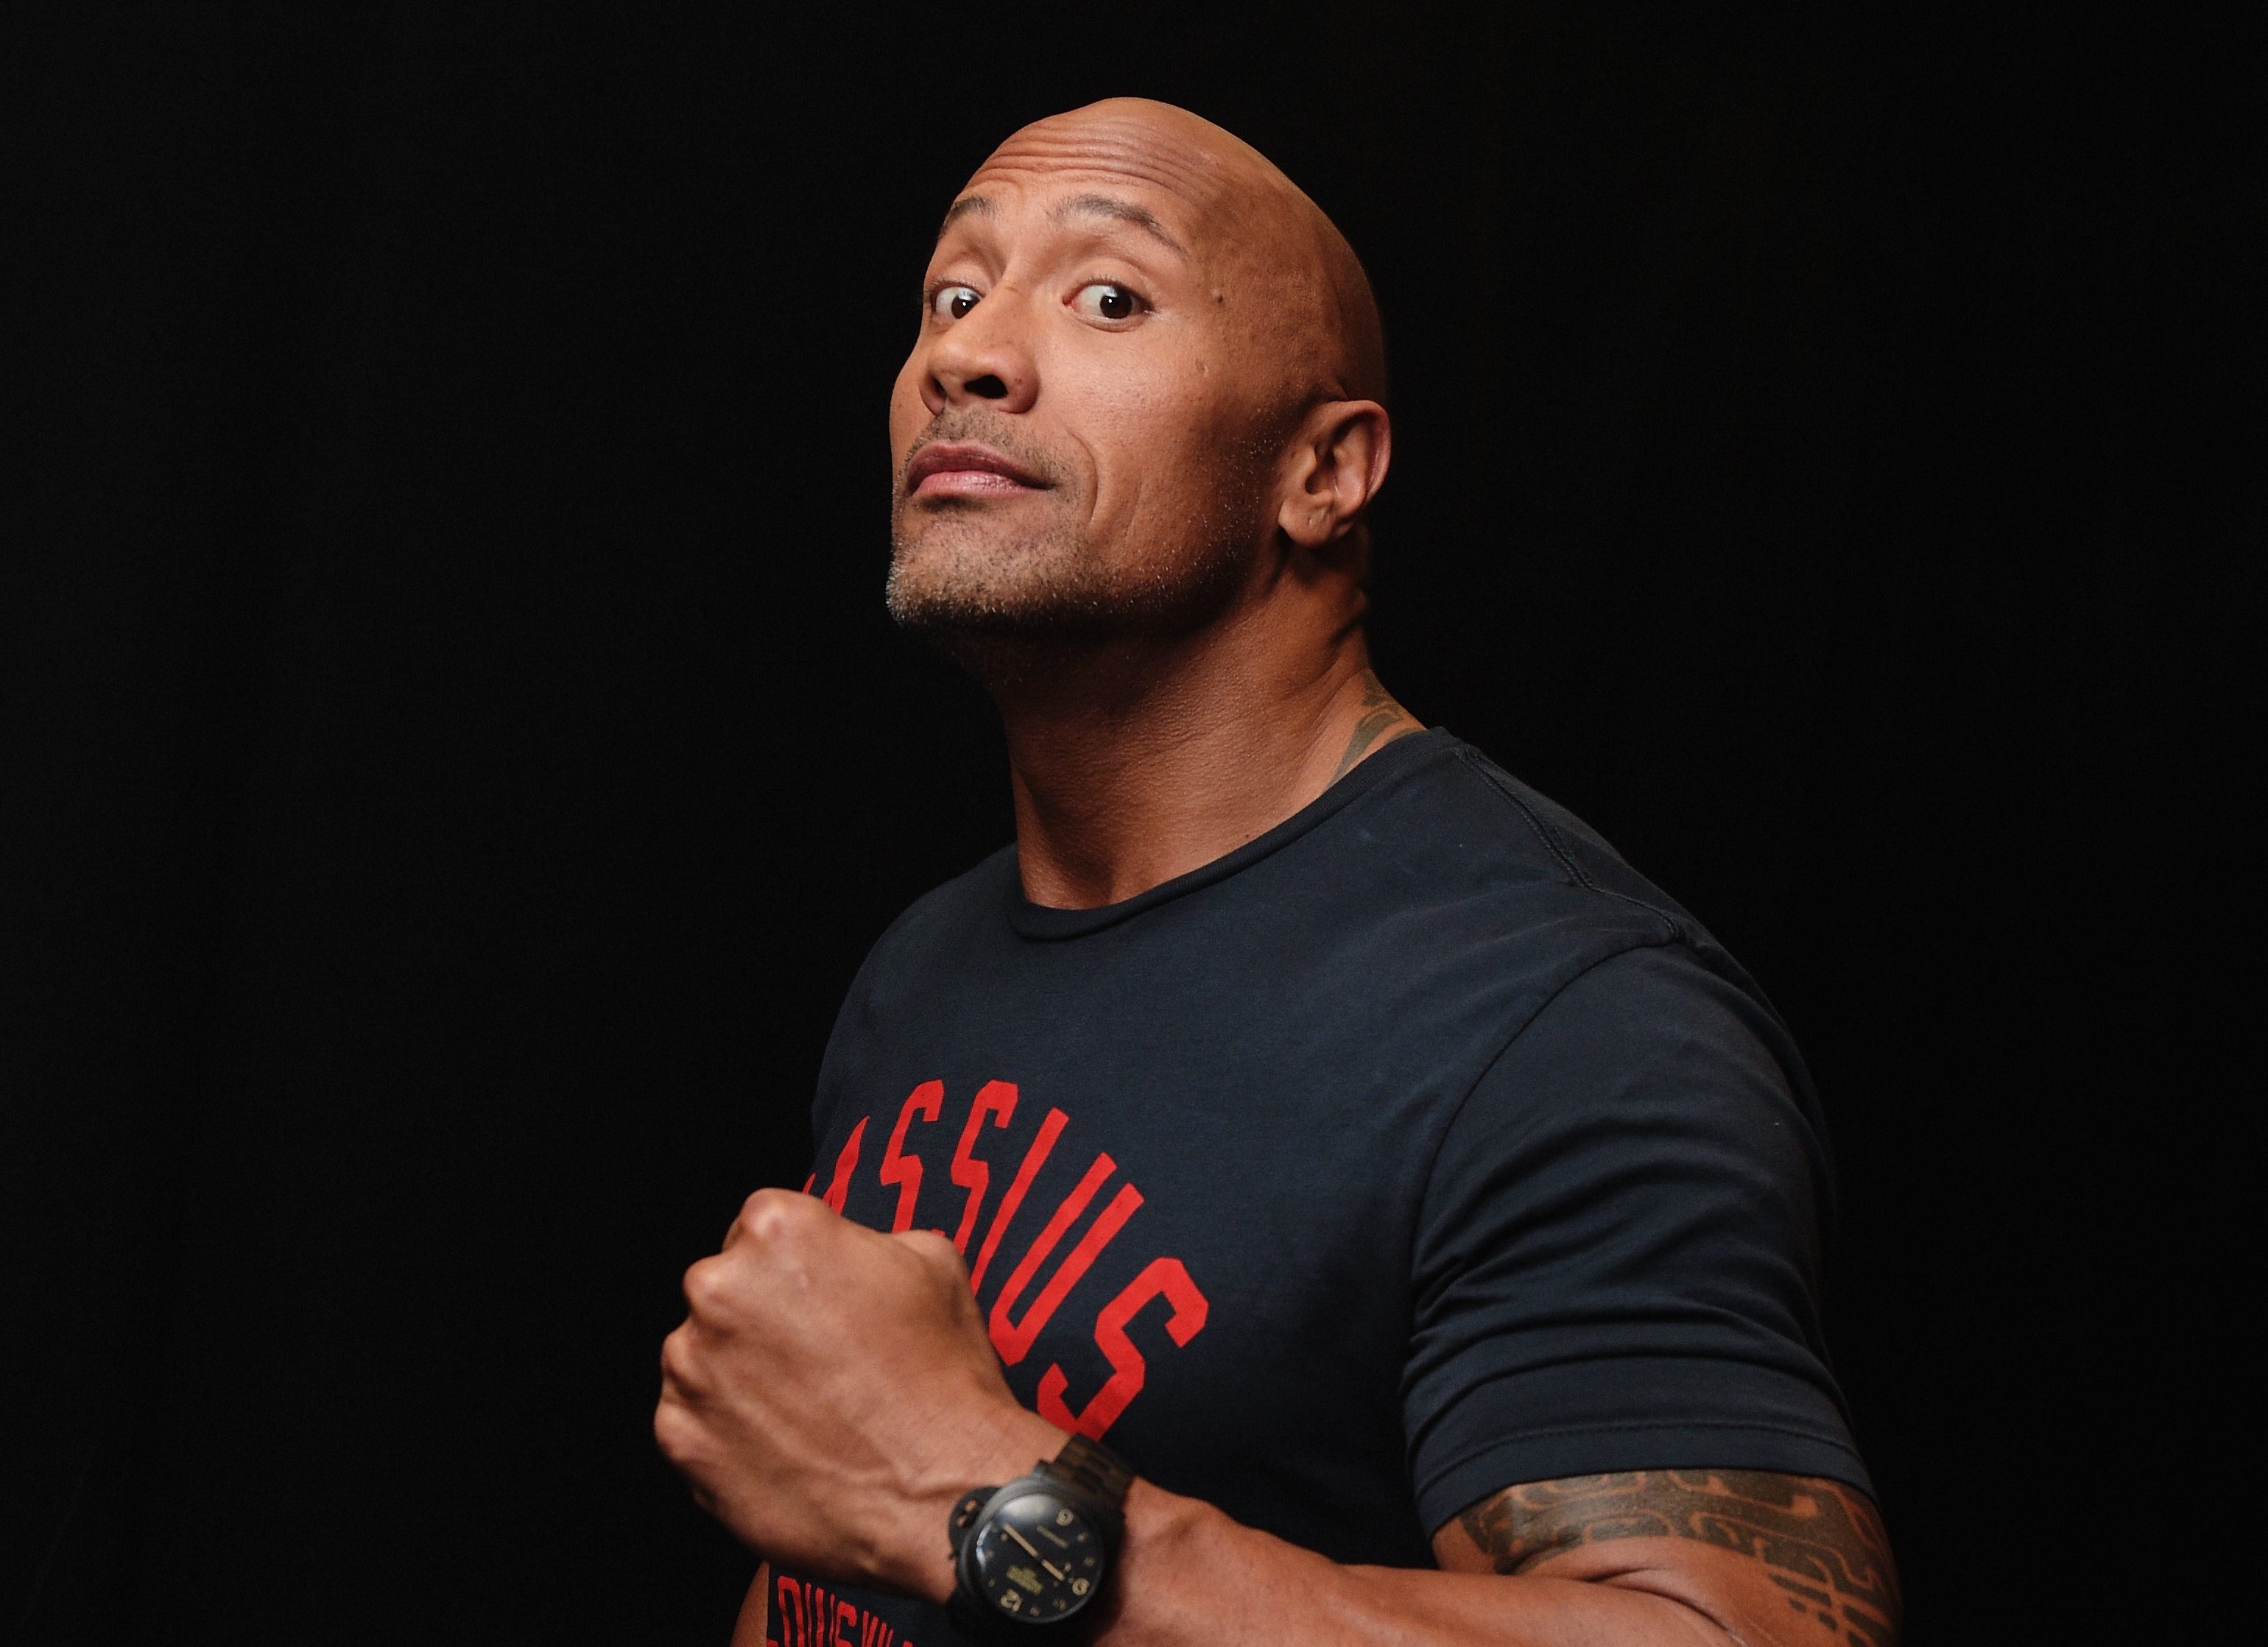 Commentator asks to respond to Dwayne Johnson if he uses steroids to maintain those muscles